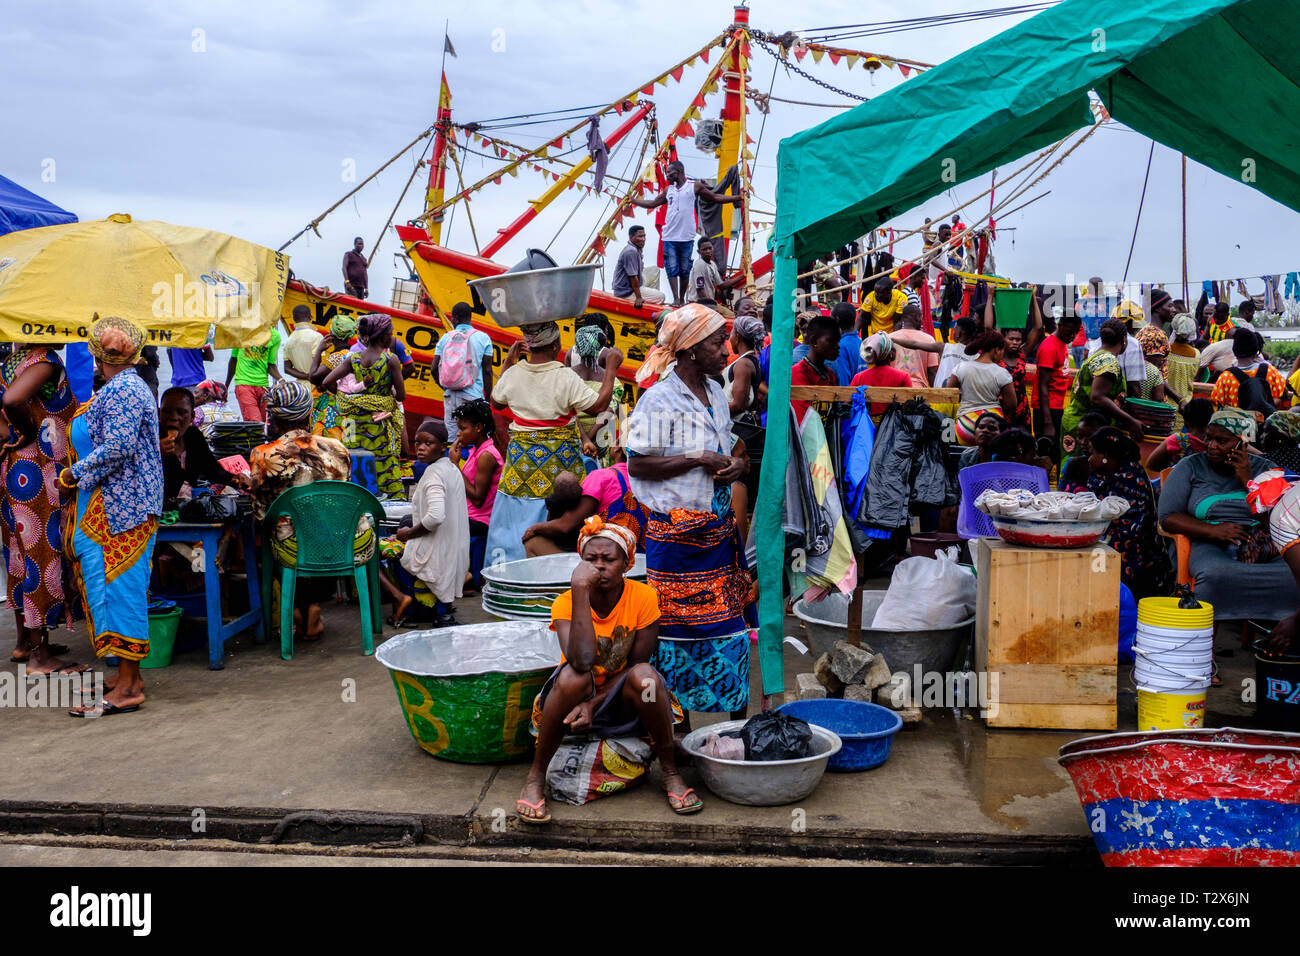 SEKONDI TAKORADI, GHANA – 10 APRIL 2018: Tired and weary looking woman sits in front of busy vibrant scene full of color at Bosomtwi Sam Fishing Harbo Stock Photo